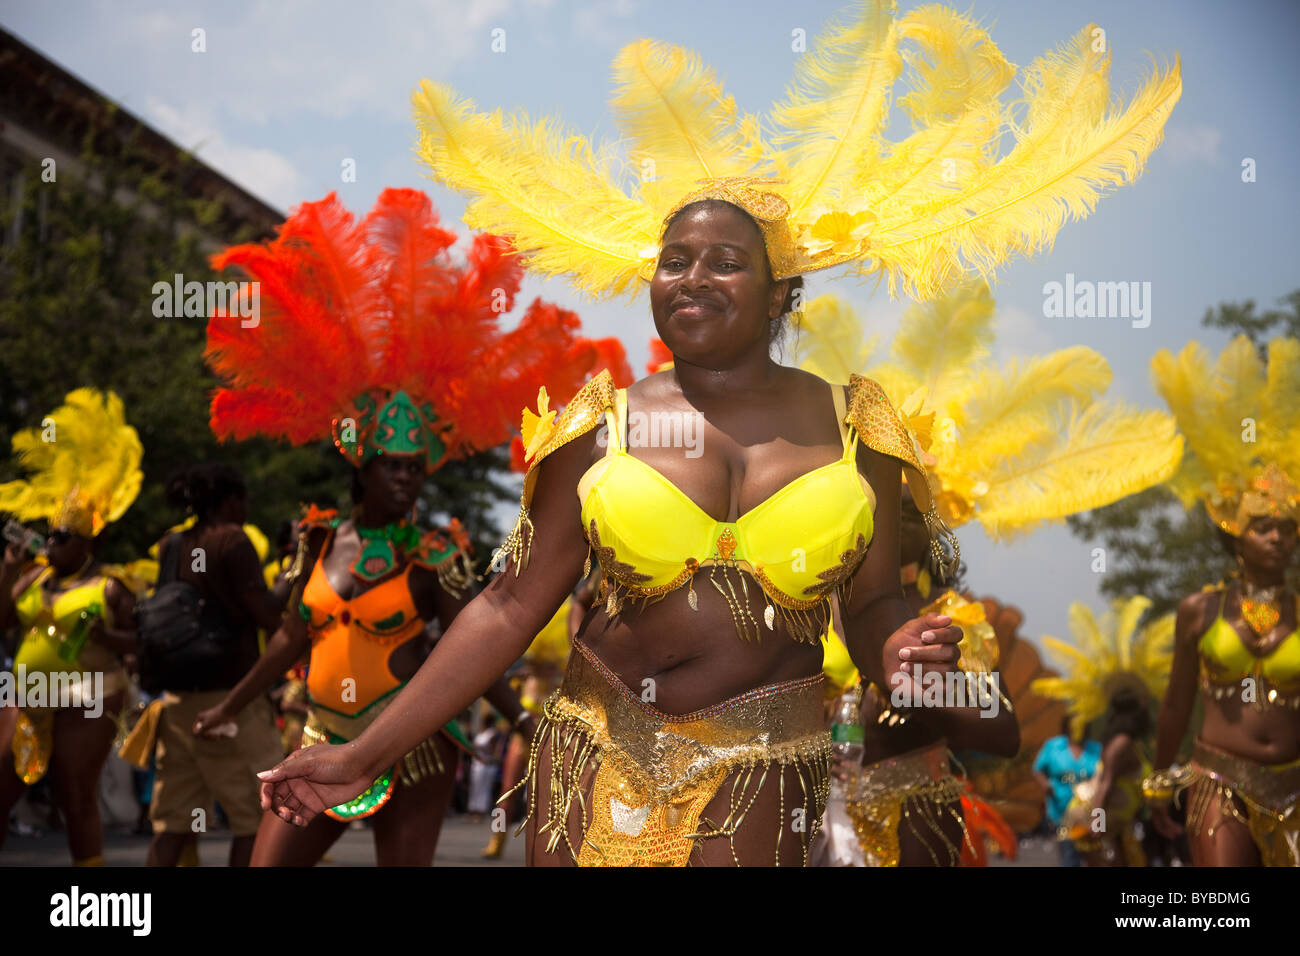 Launched By A Large Caribbean Style Parade The Dc Caribbean Carnival Is Held Annually In 